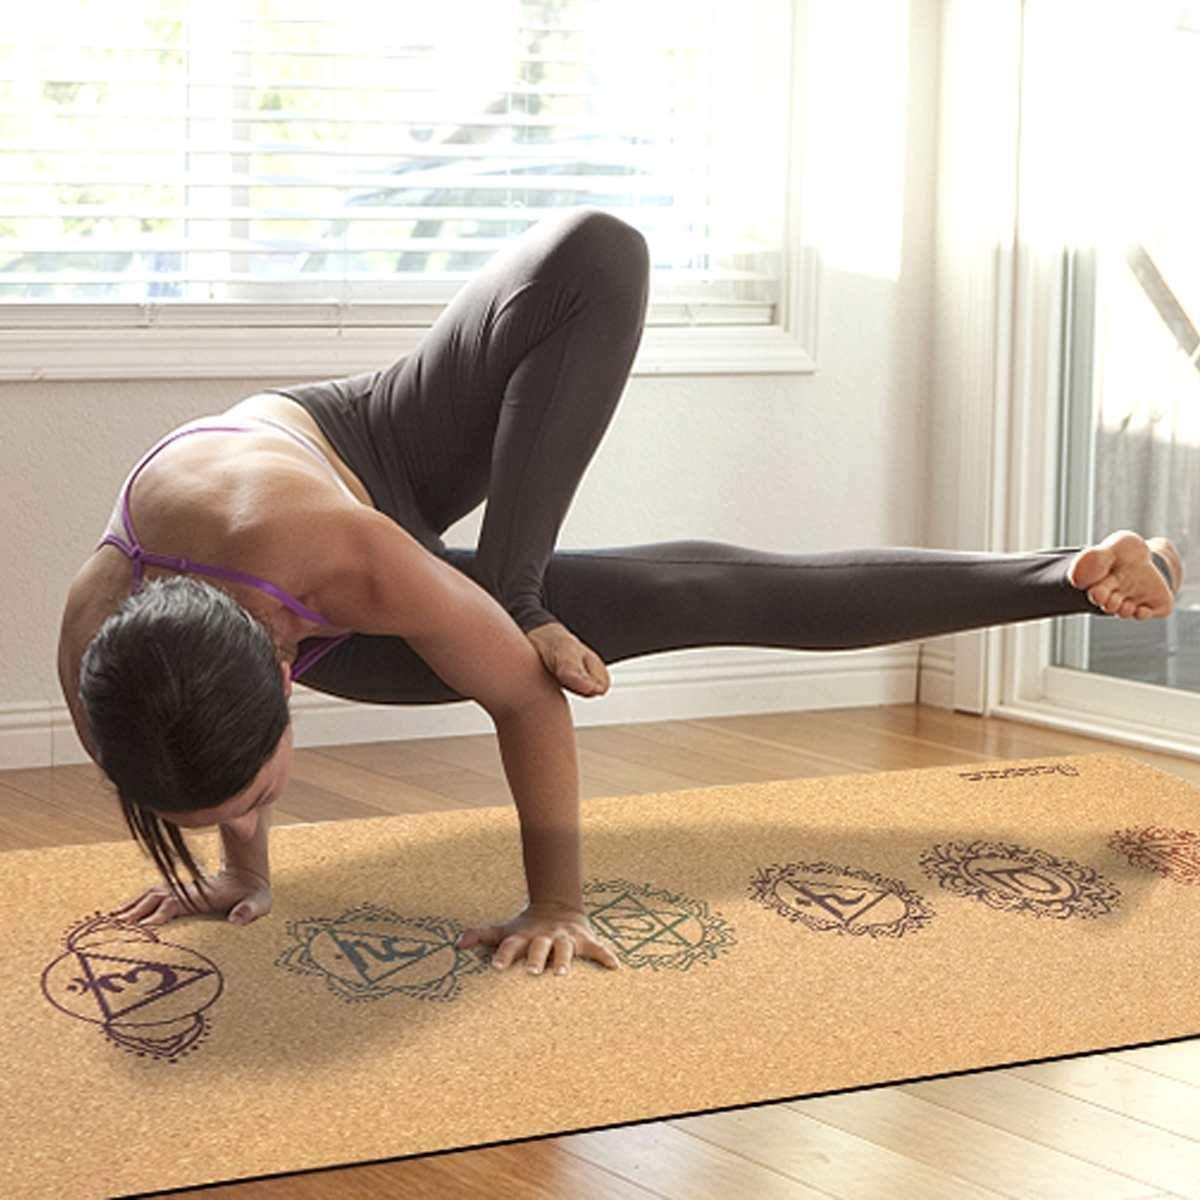 Product Review: The Cork Yoga Mat by Yoloha